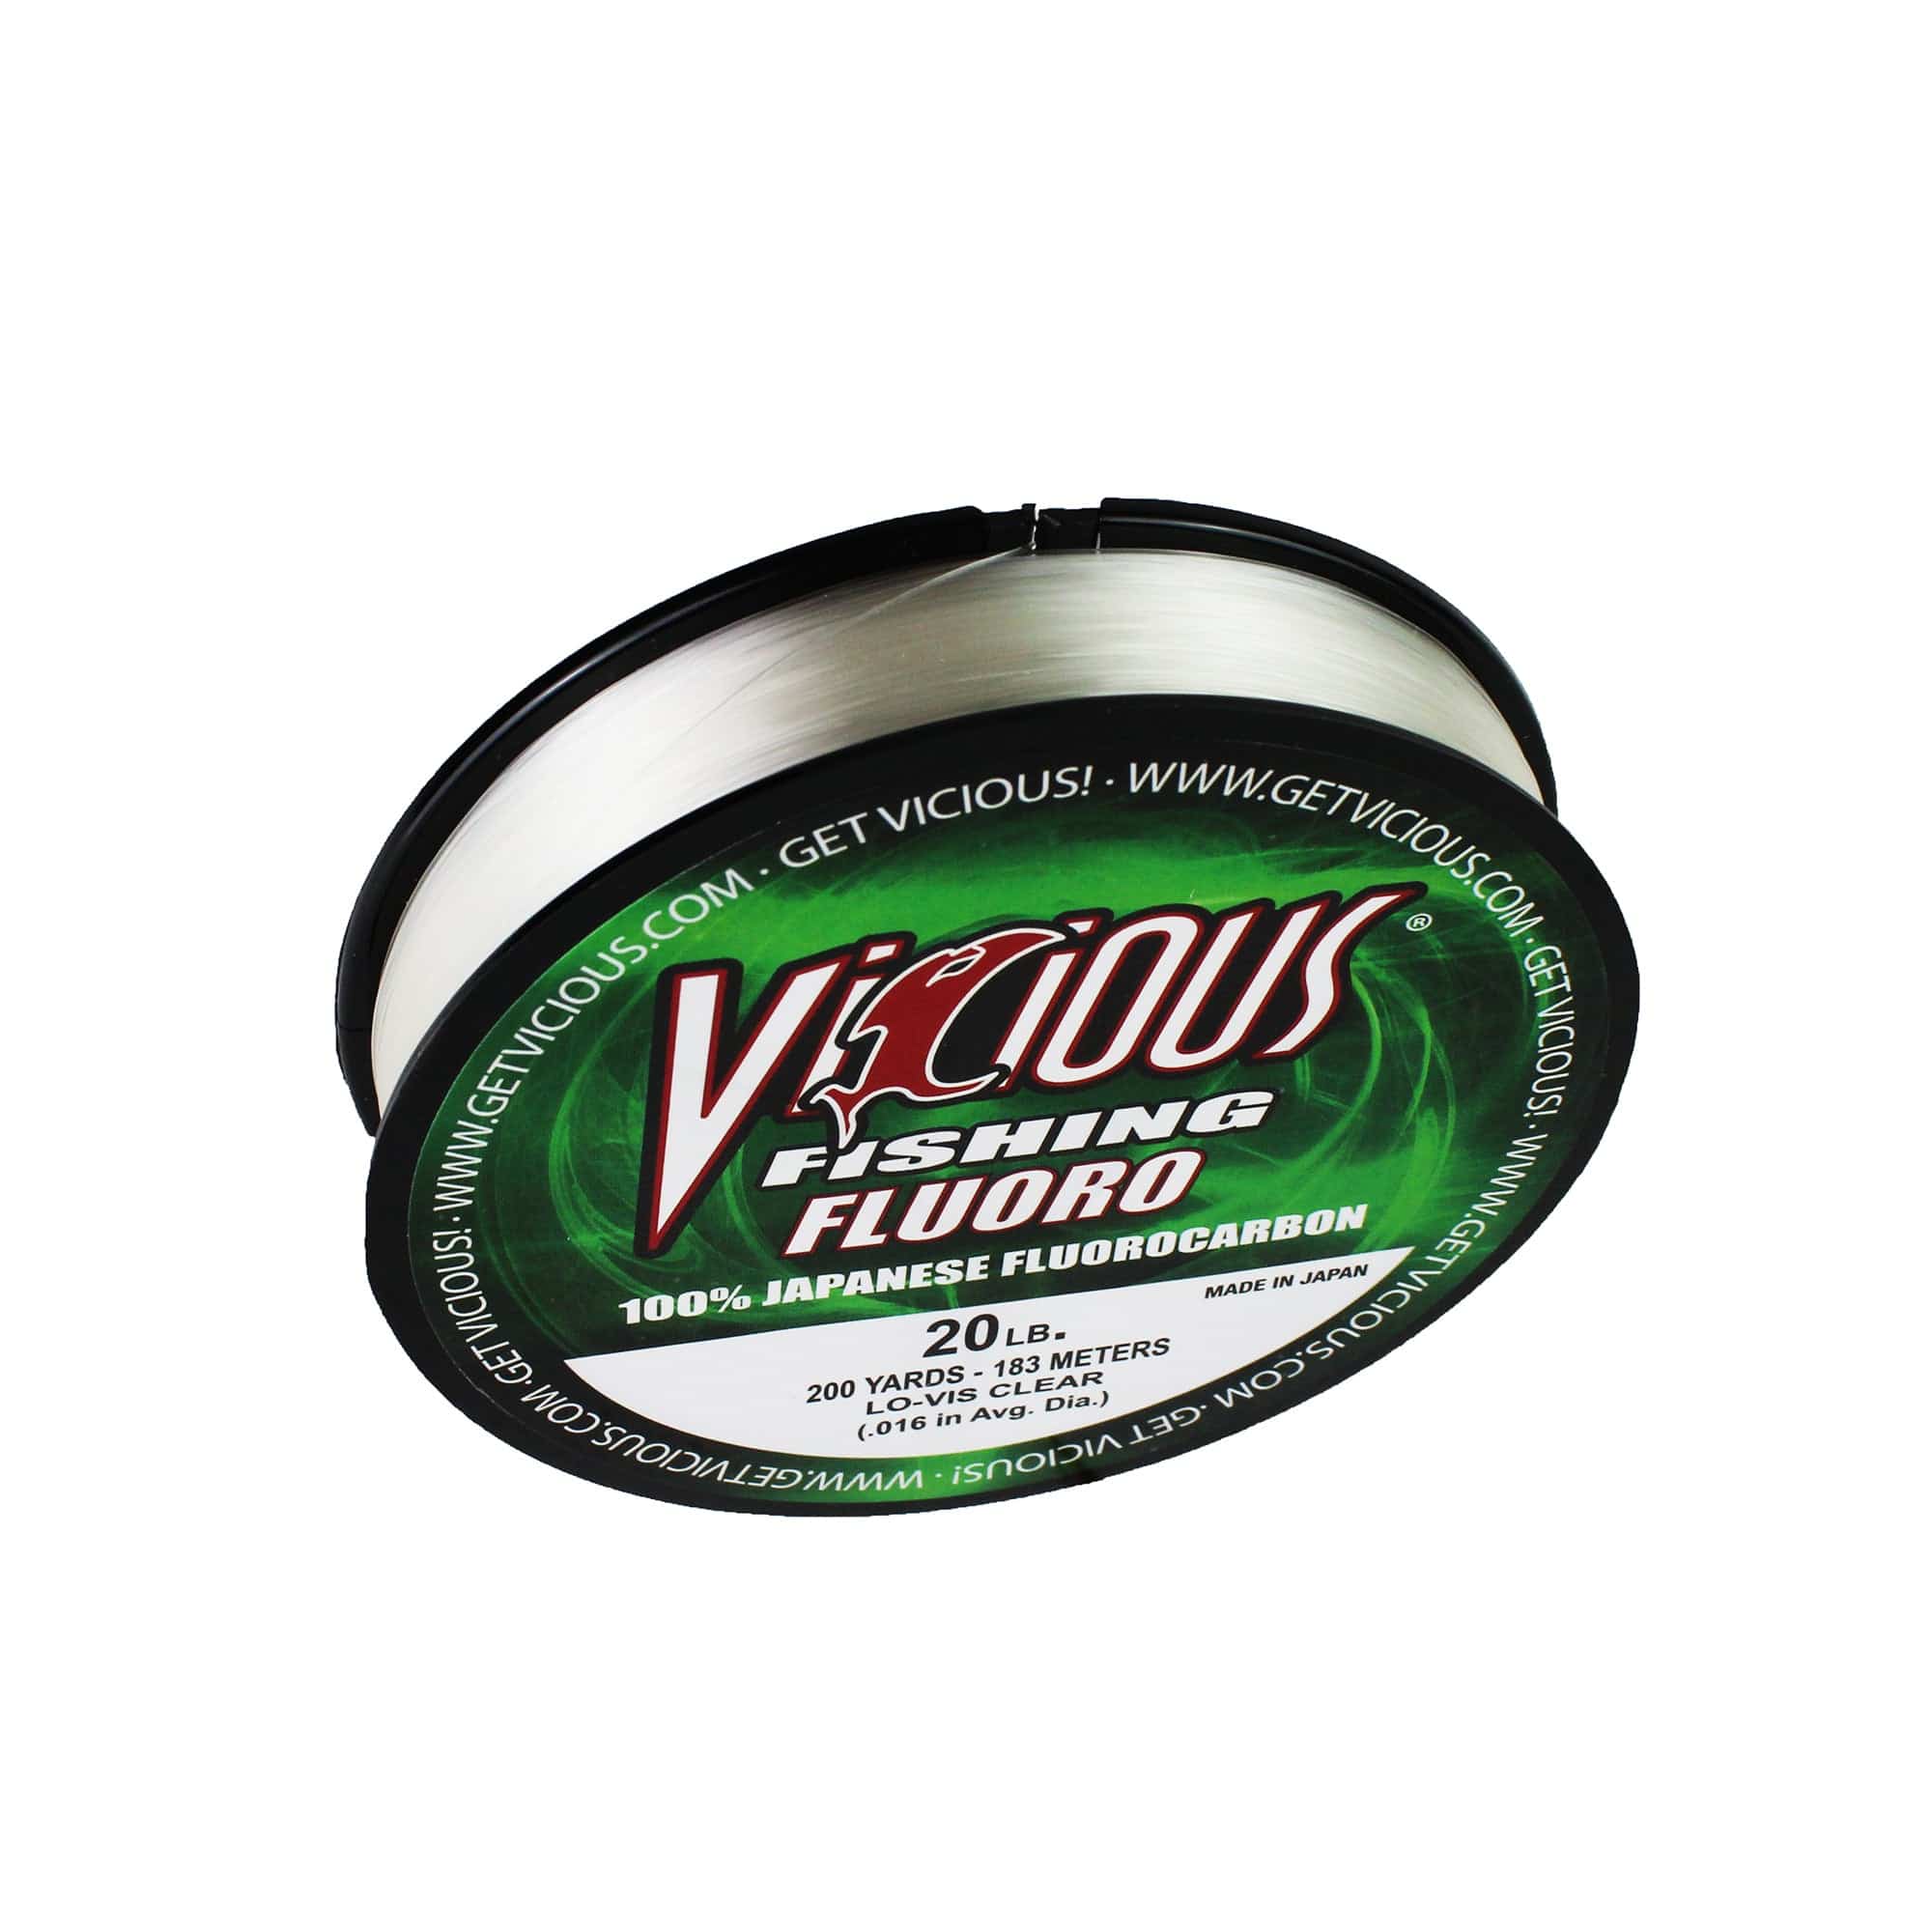 Discount Vicious Panfish Fishing Line, 100 Yards, 4lb, Clear for